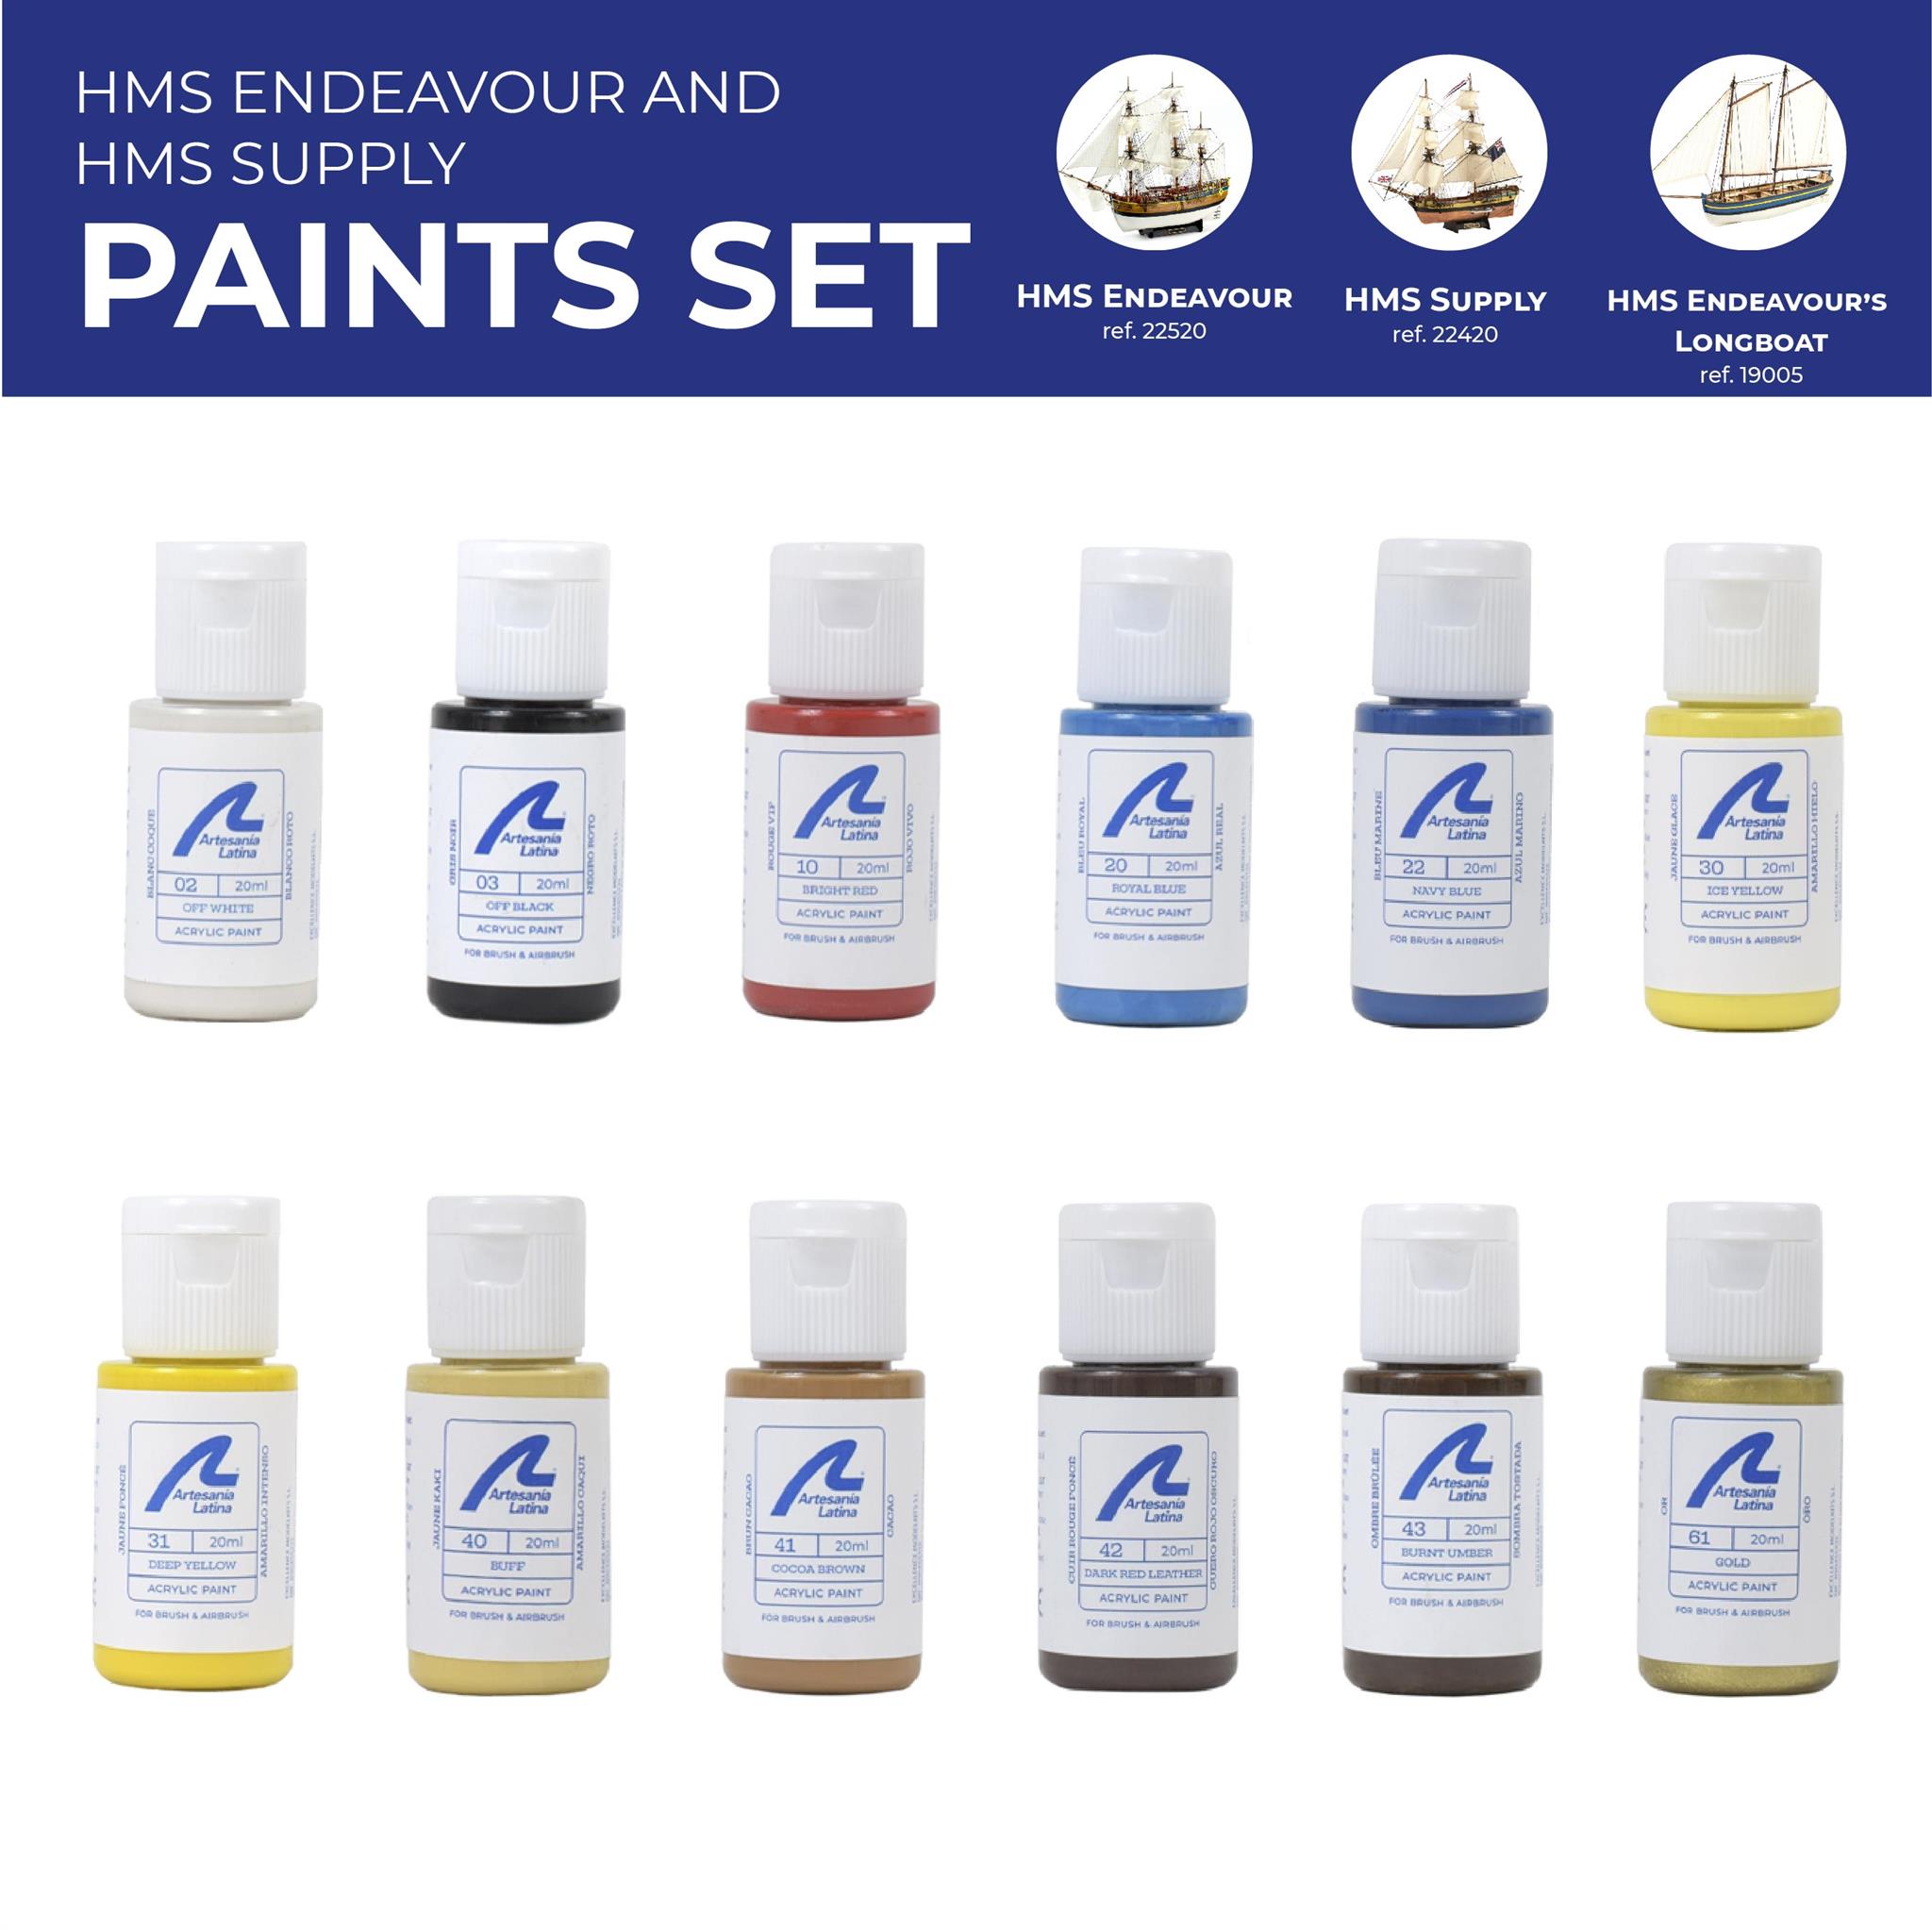 Specific Set of Paints for HMS Supply (277PACK7) by Artesanía Latina.